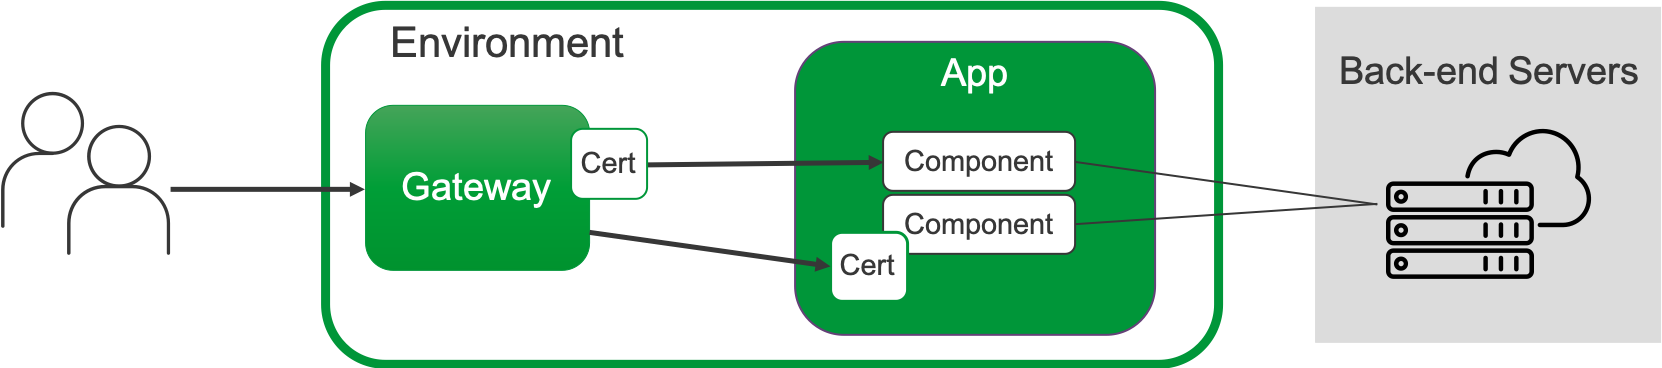 Example traffic flow through a gateway to app components that represent a back-end application. Certs can be configured at the gateway or at the app component level.